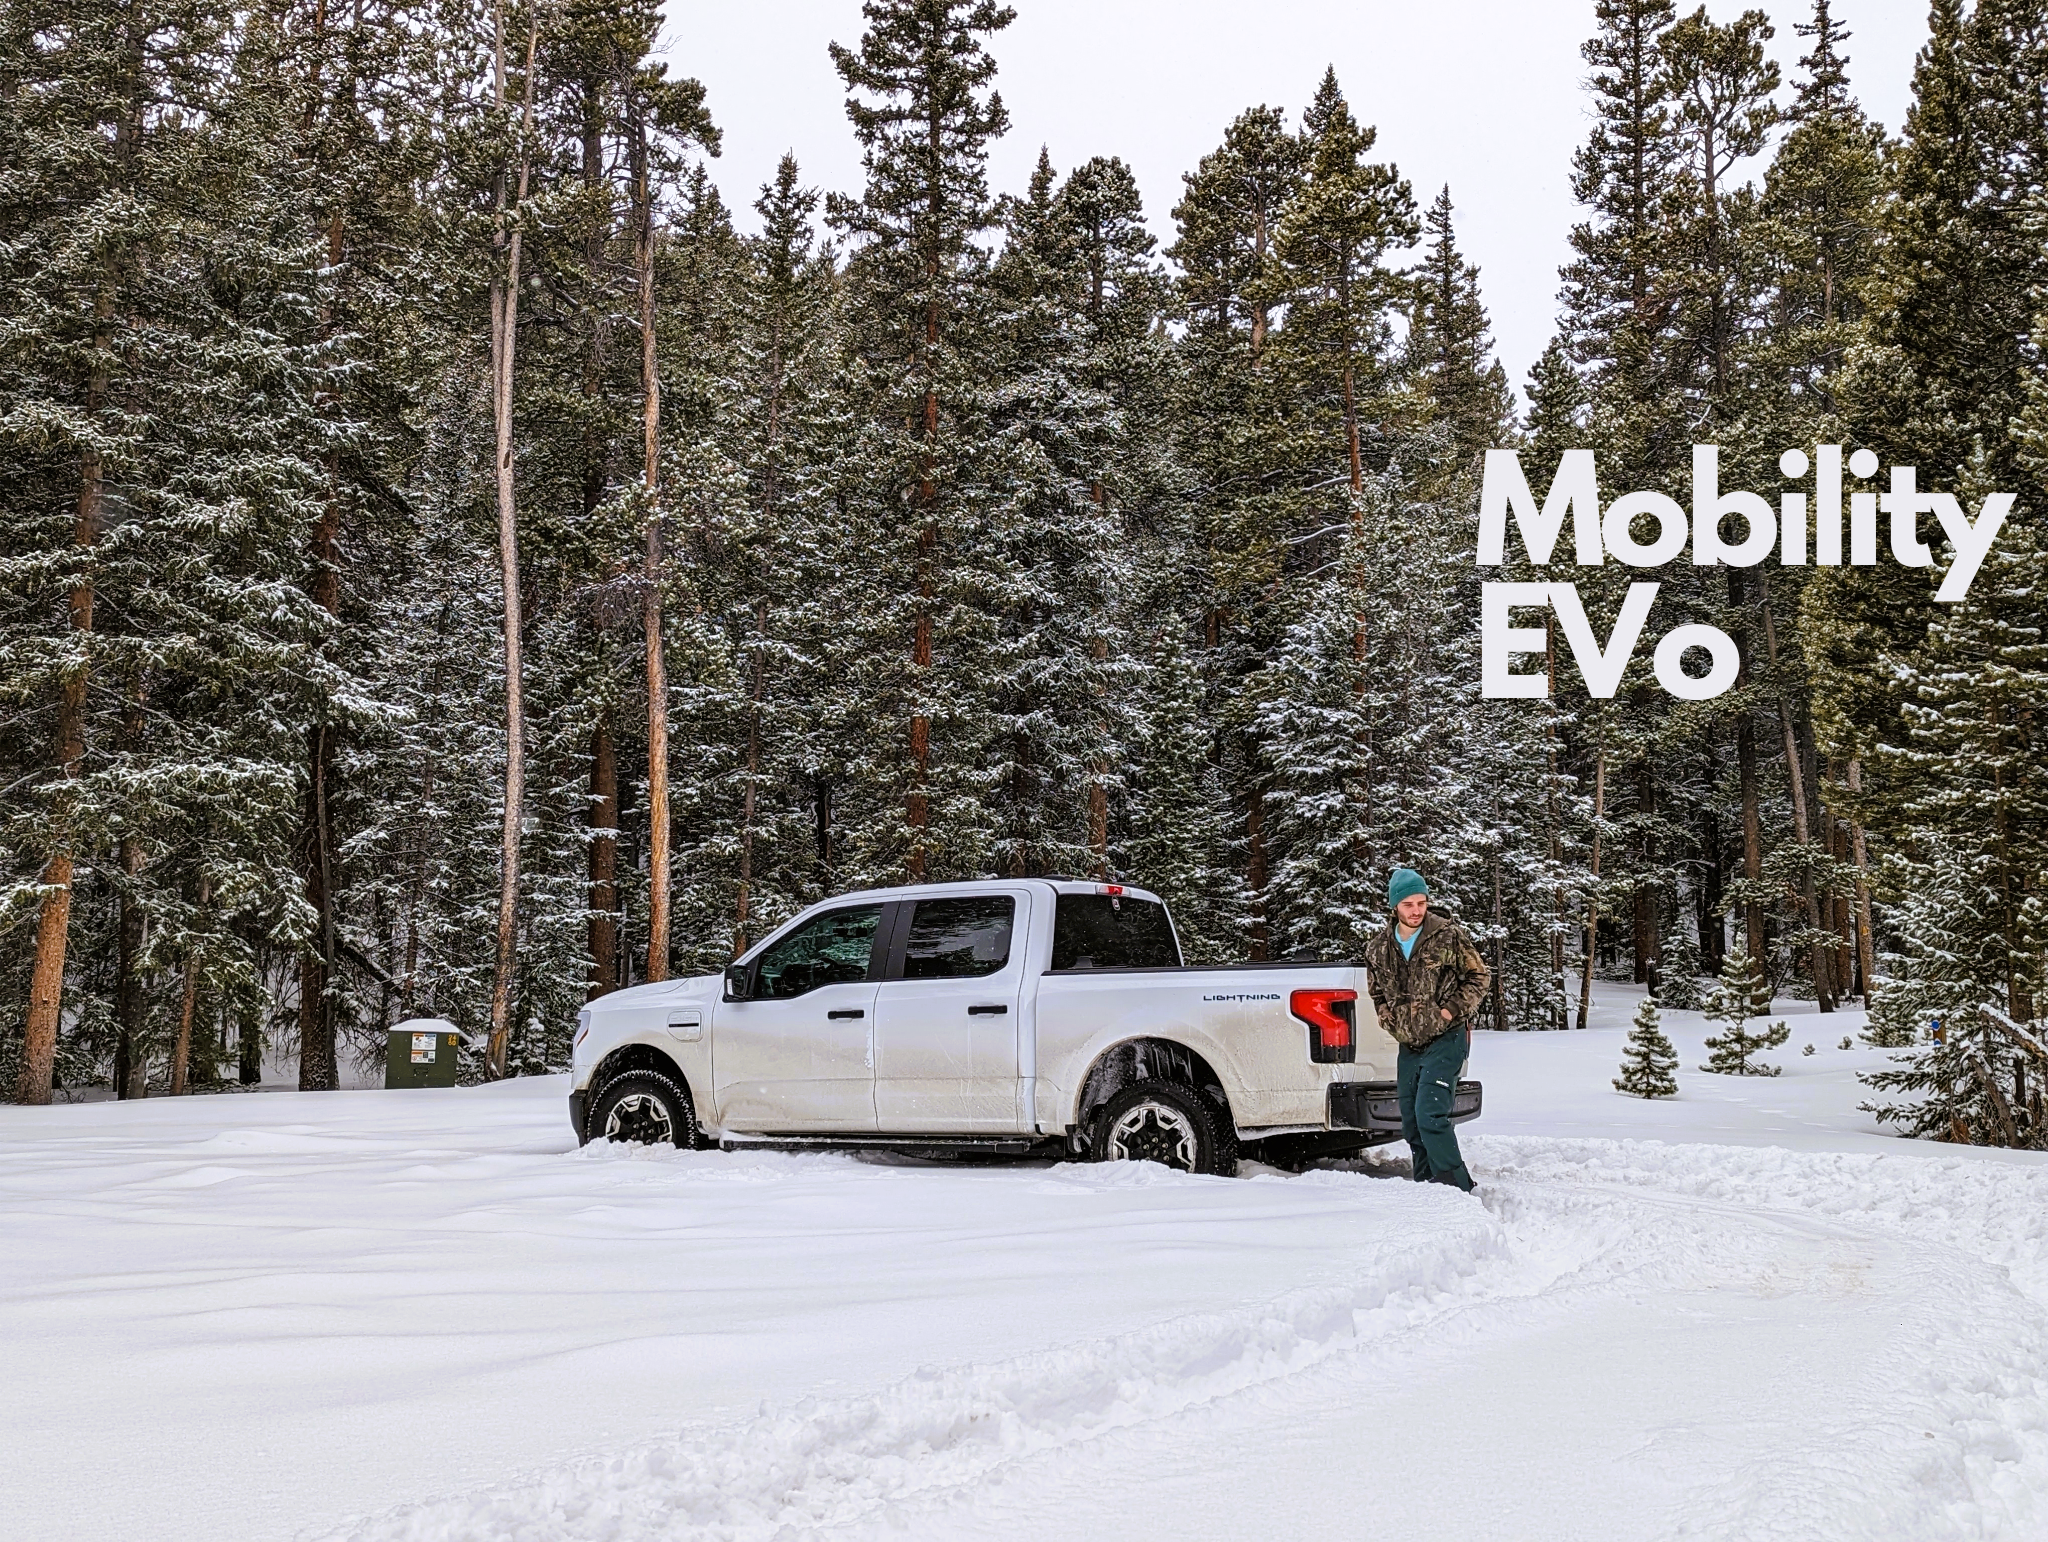 World's First Off-Road EV Race Mobility EVo